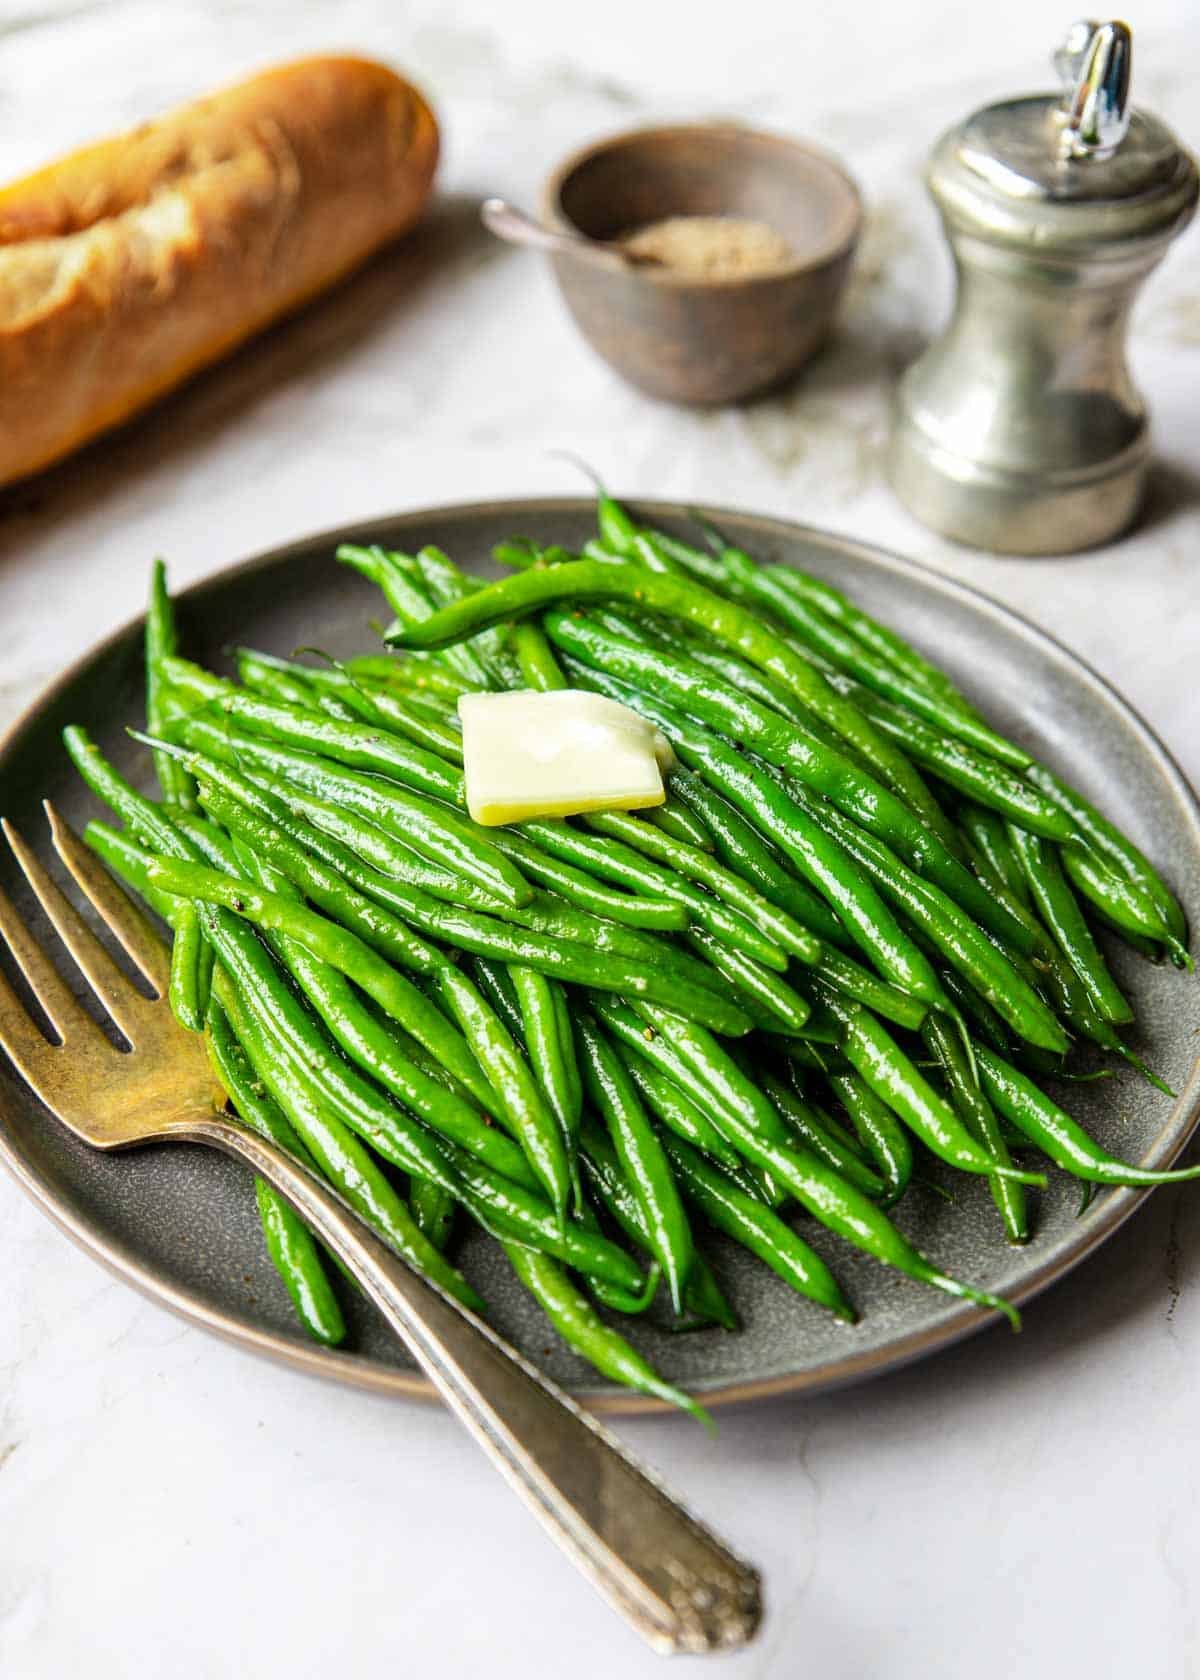 haricot verts on a plate with a pat of butter and a baguette in the back